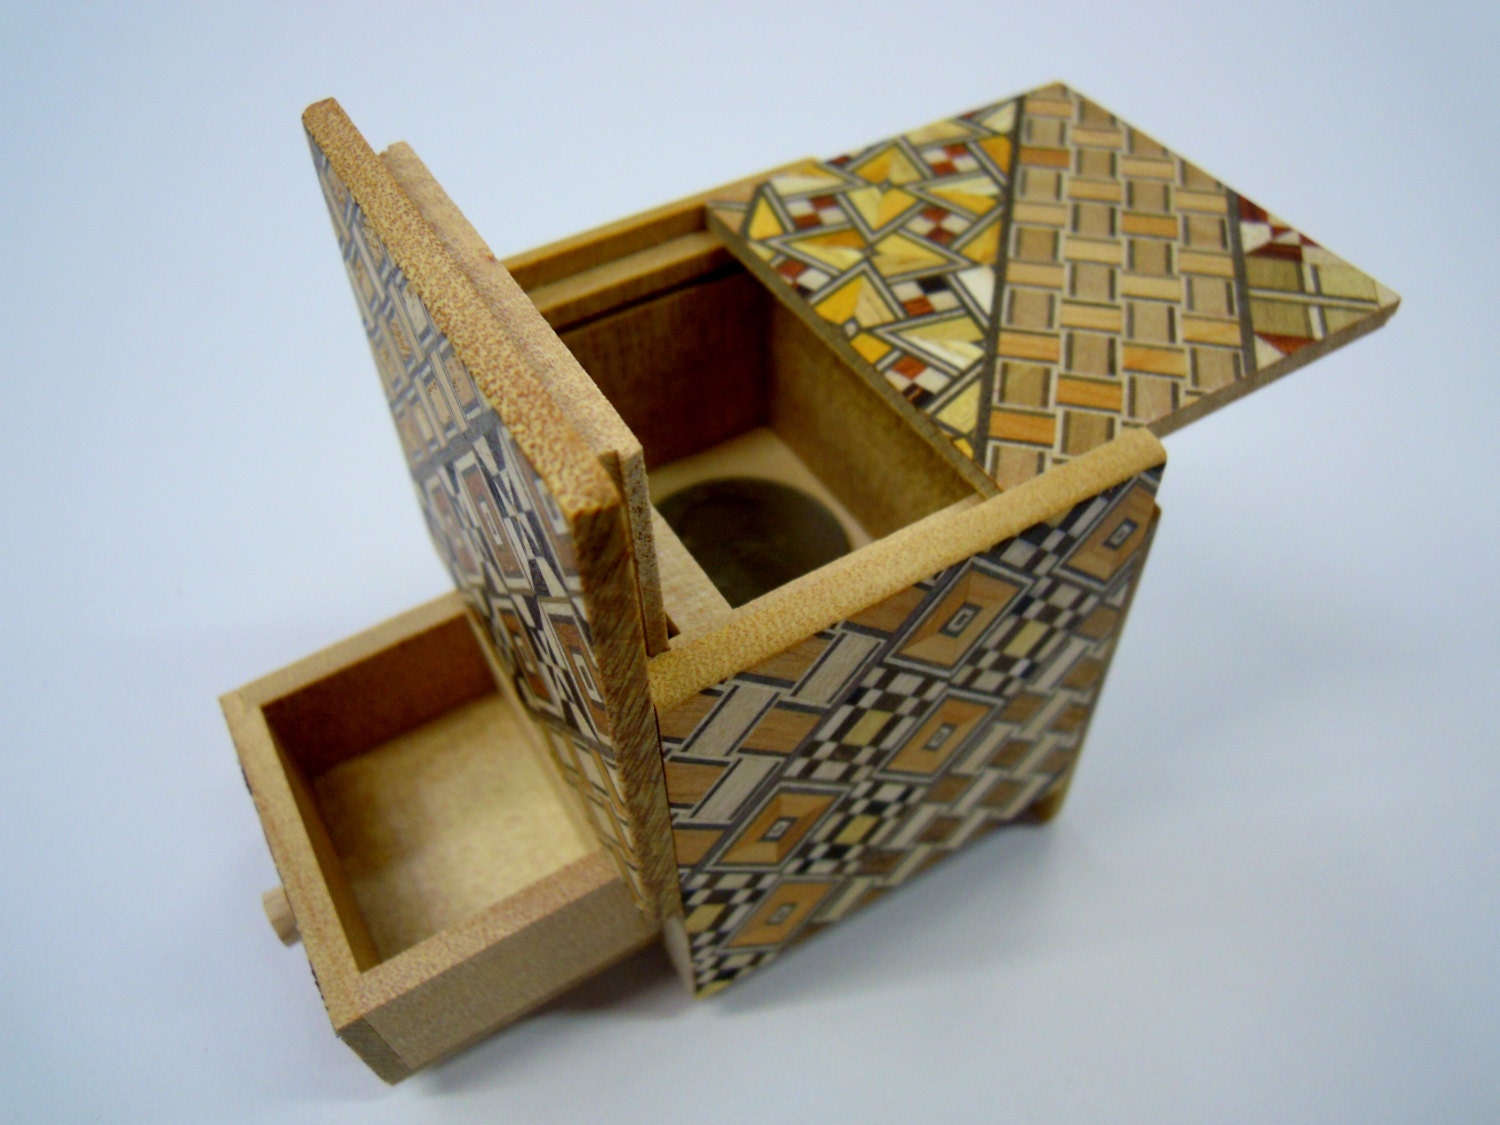 Japanese Puzzle box Himitsu bako 2.2inch56mm Cube Open by 